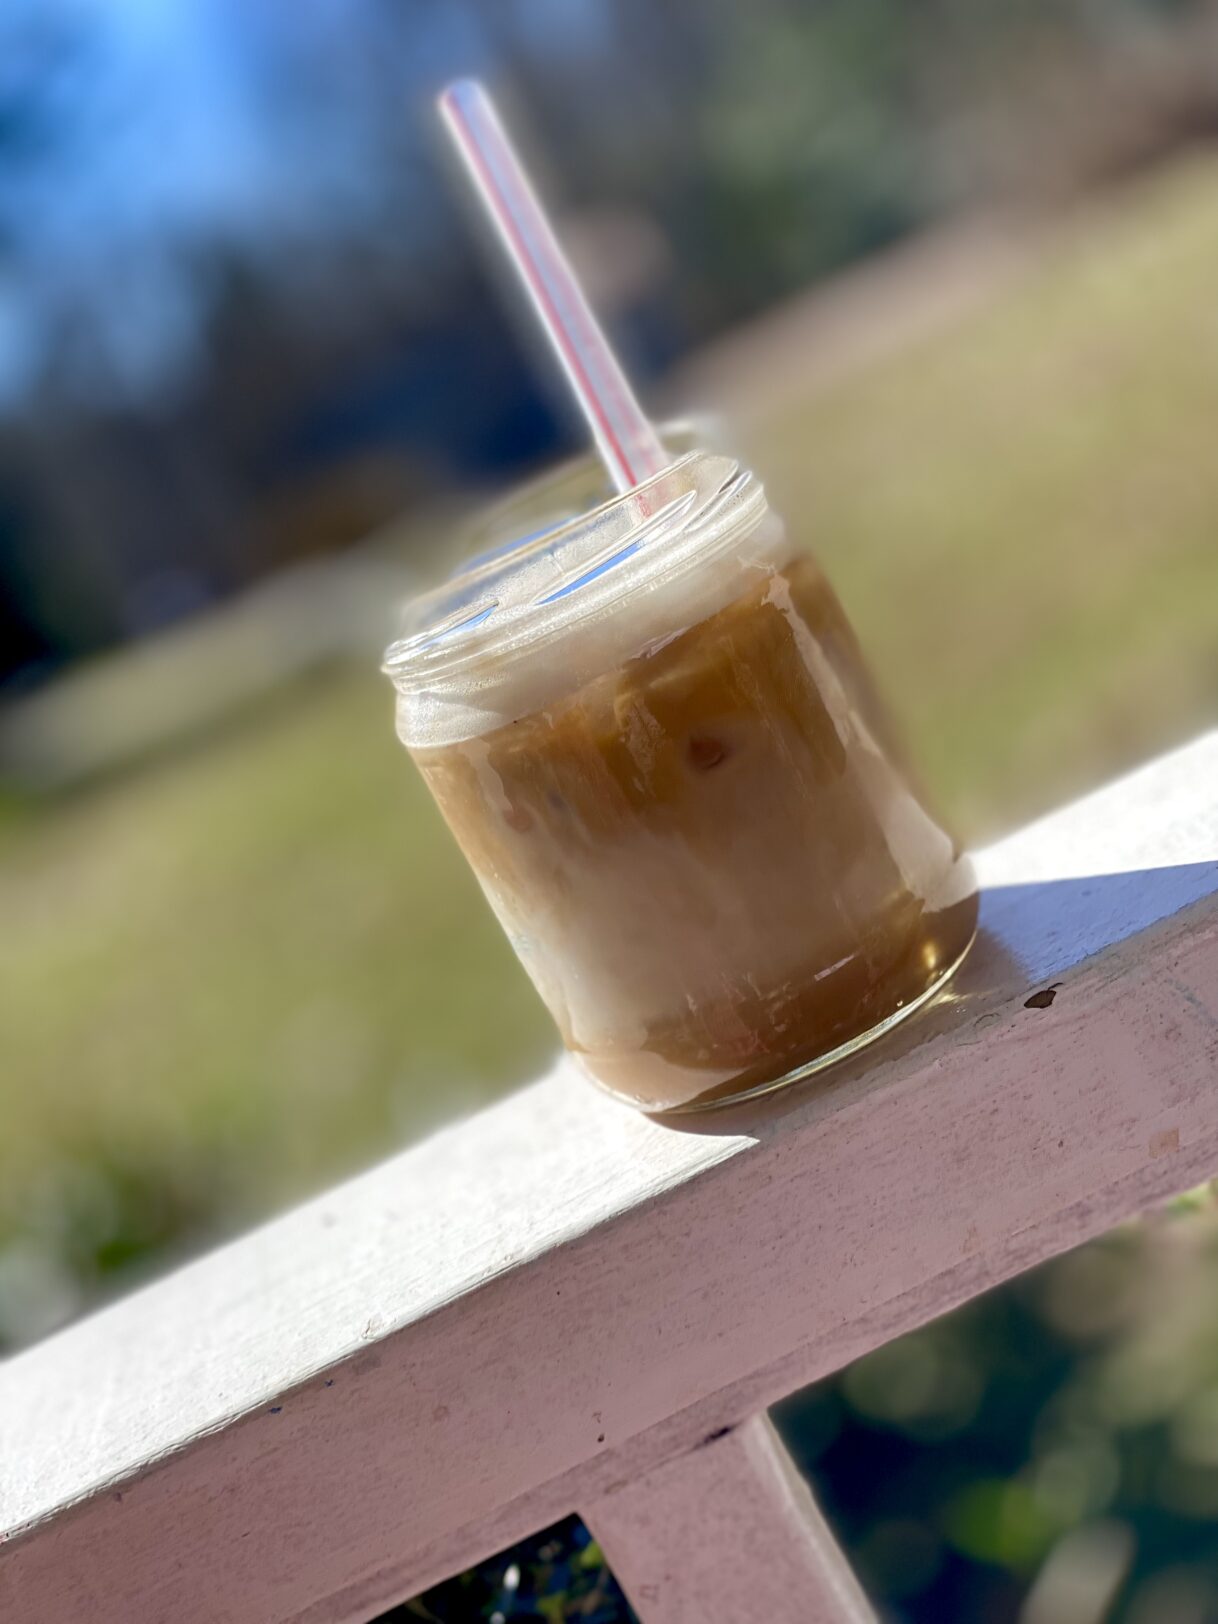 Iced Lattes and a Little Porch Sitting – Athens, Georgia – 01/14/2022